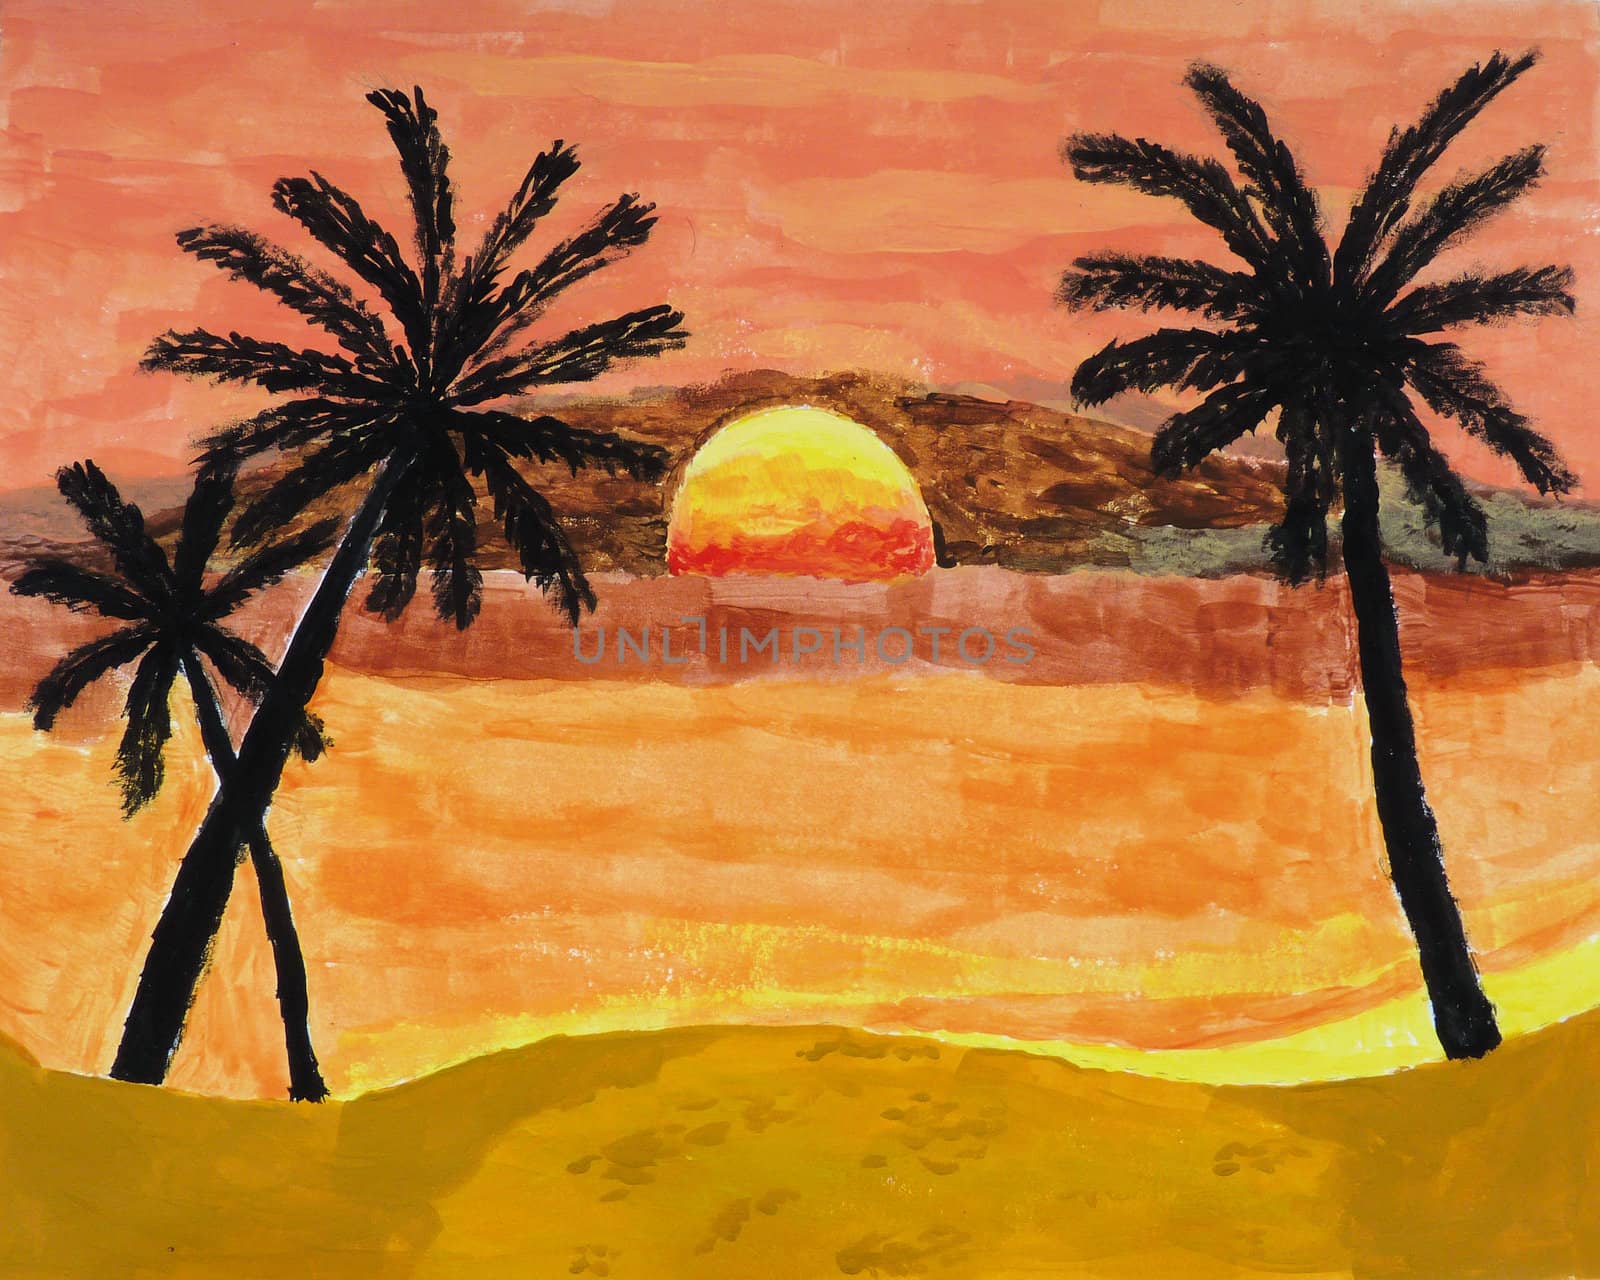 A painting of tropical sunset landscape